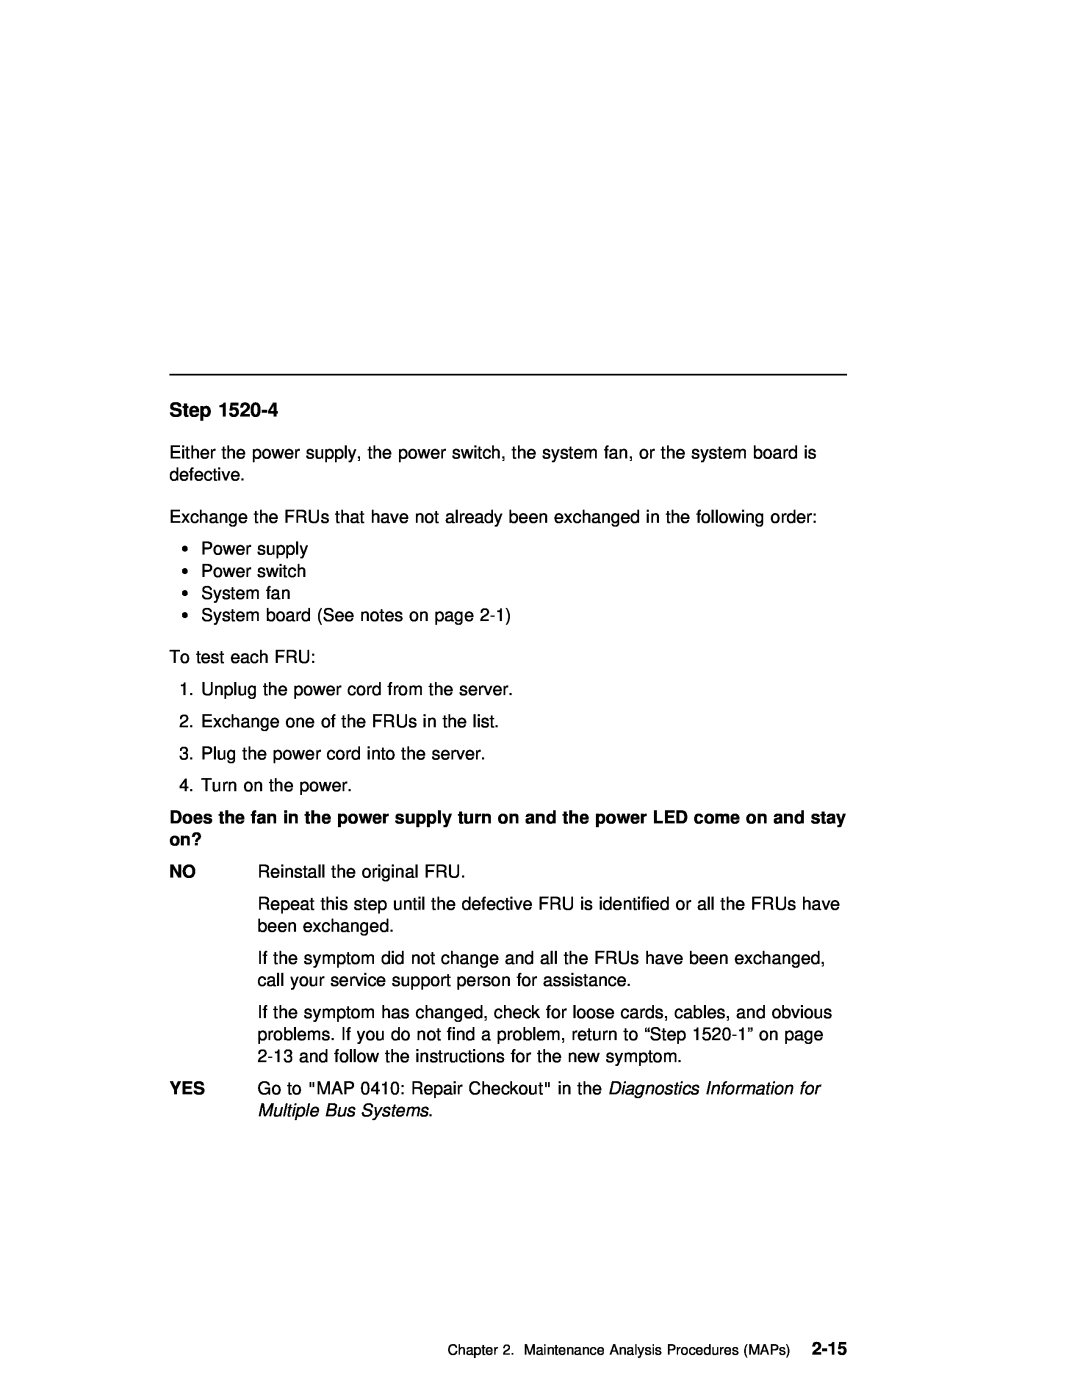 IBM B50 manual in theDiagnostics Information for, 2-15, Step, Multiple Bus Systems 